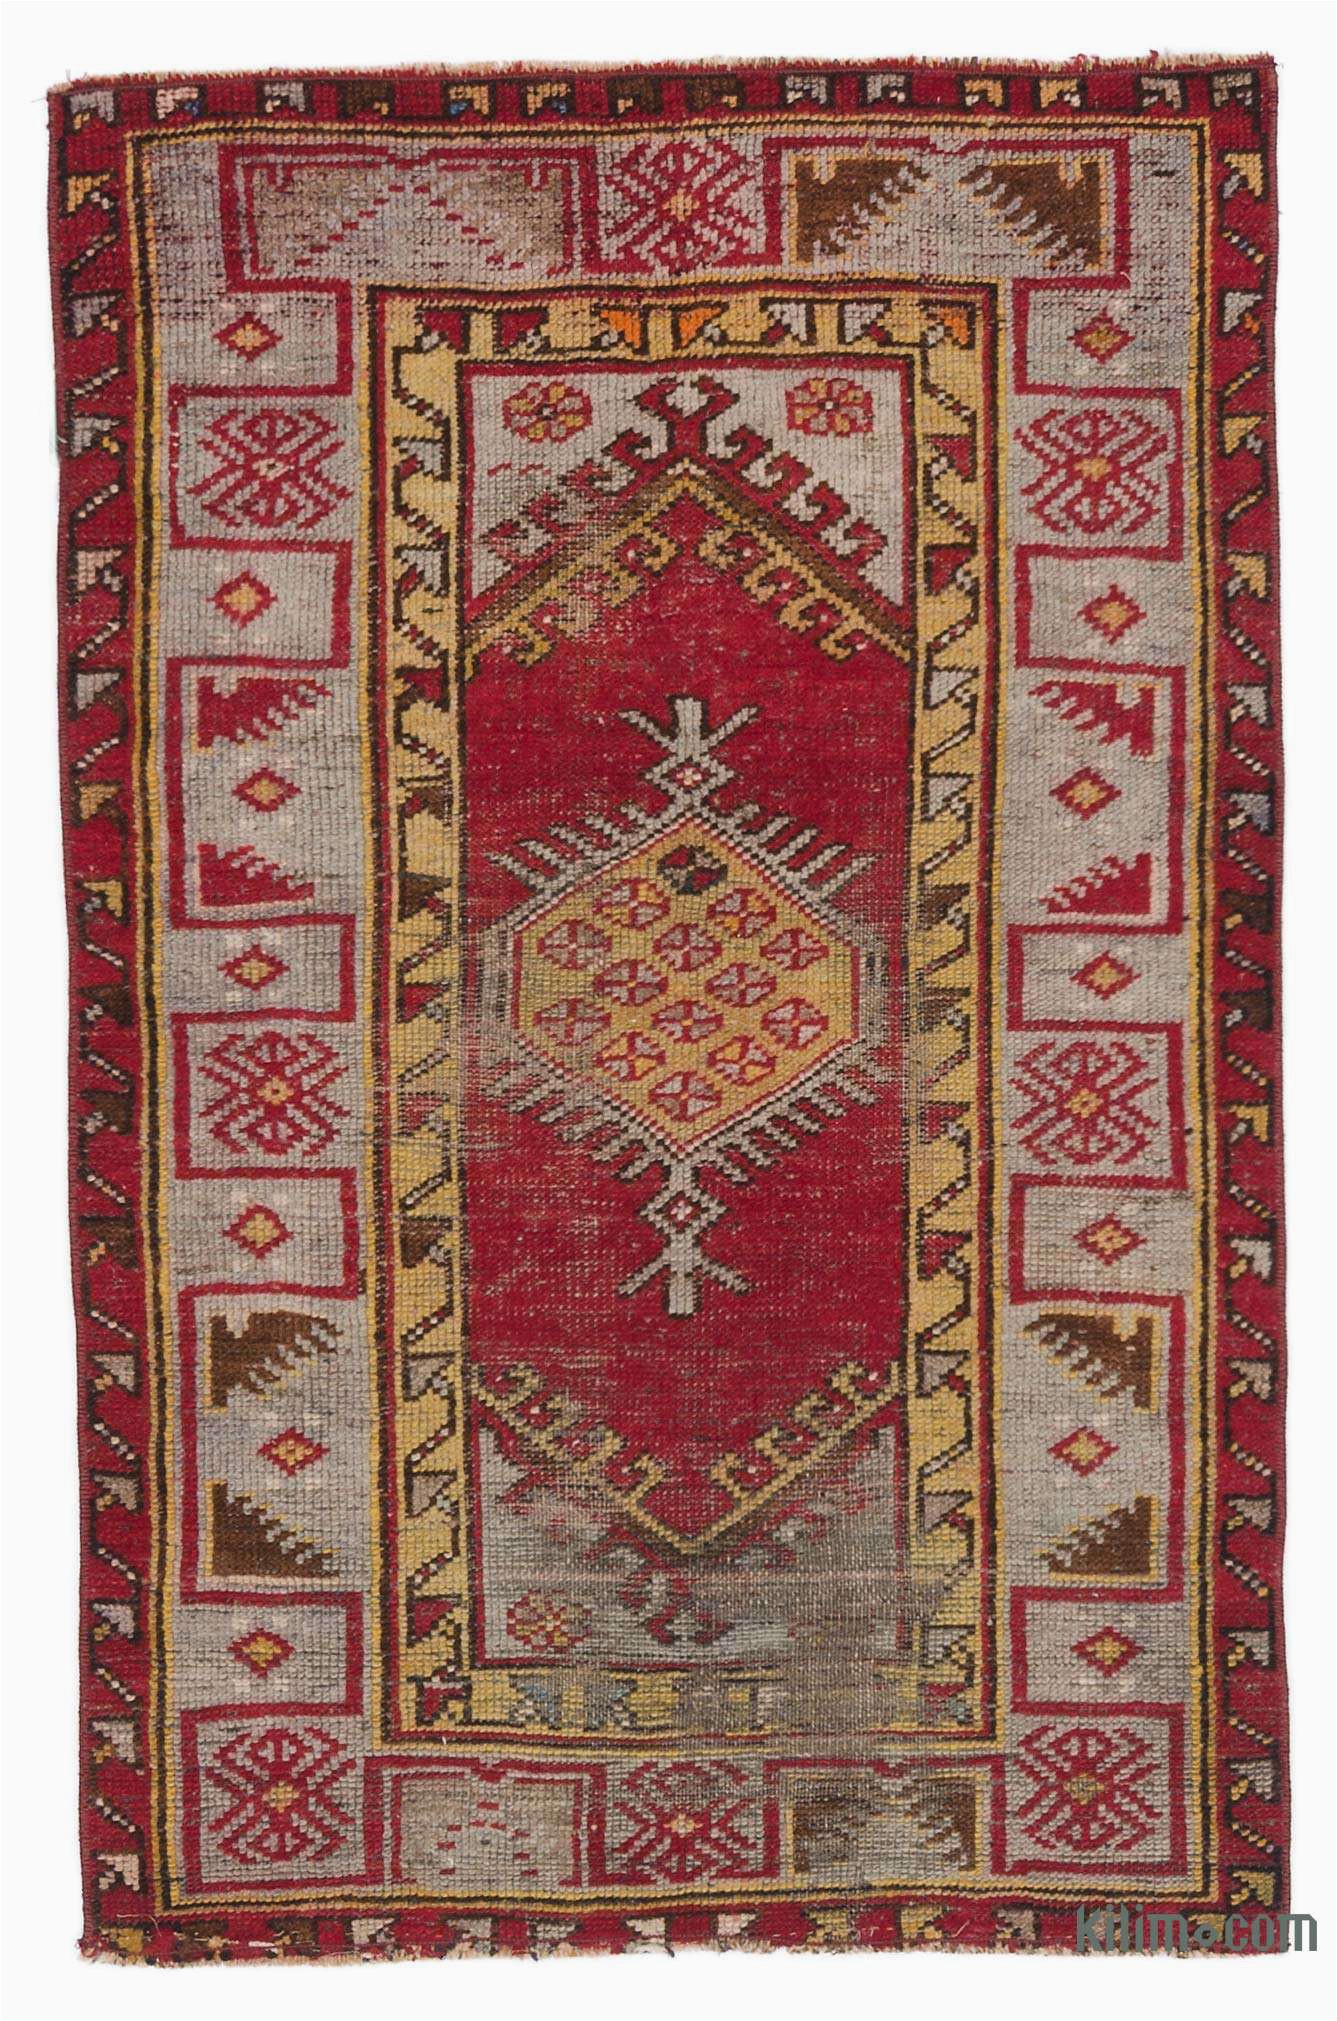 16 X 20 area Rugs Turkish Vintage area Rug 2 7" X 3 11" 31 In X 47 In